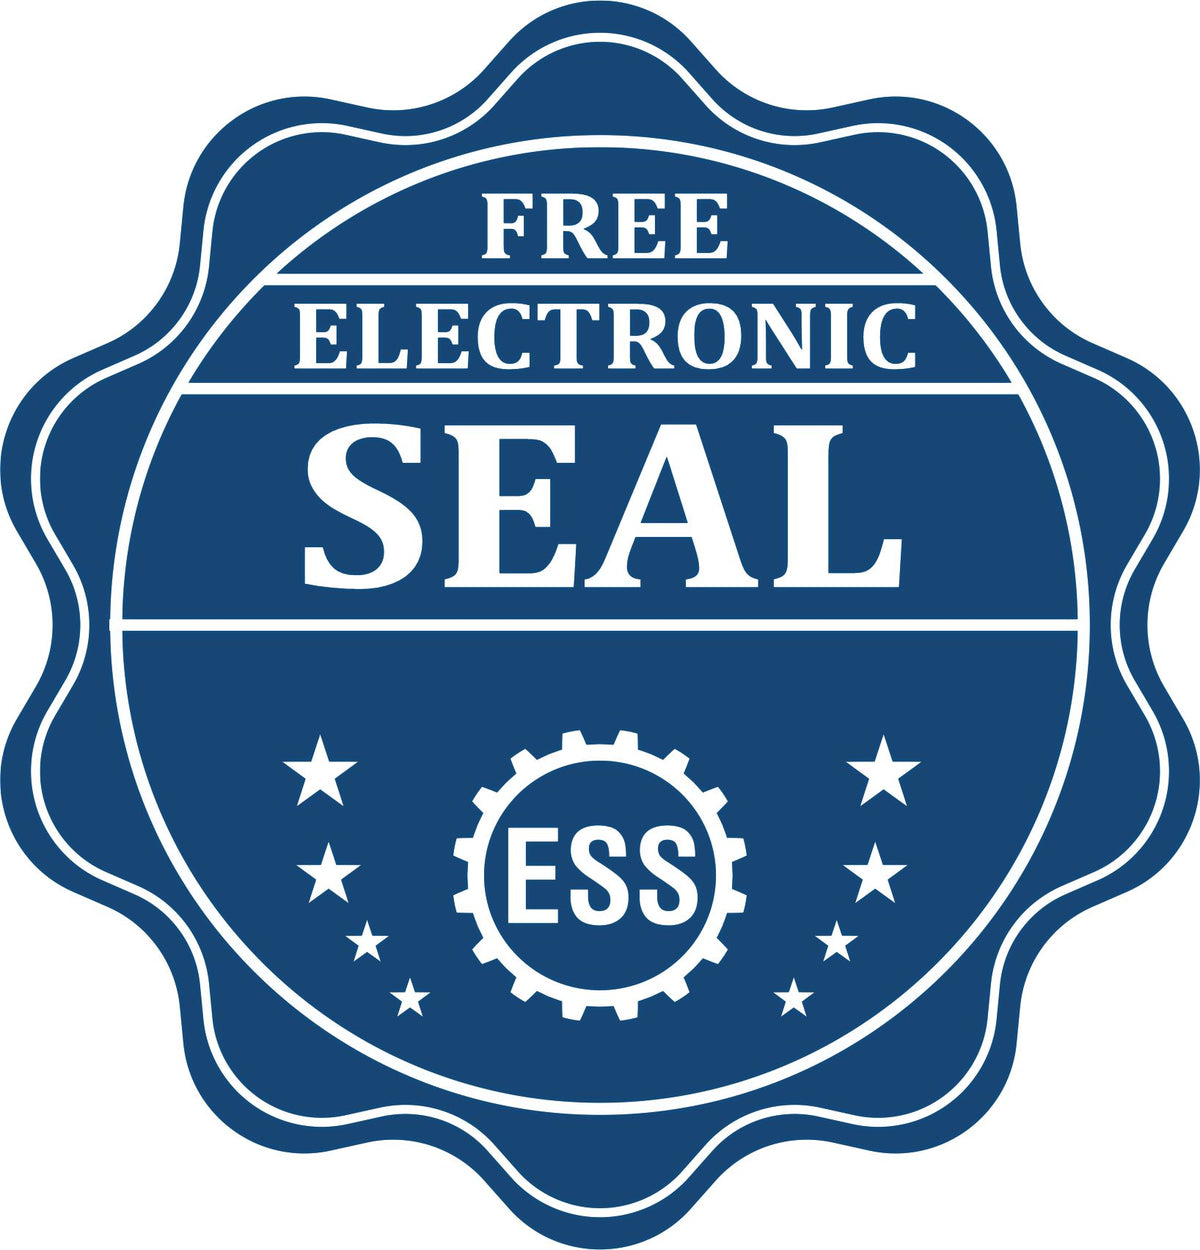 A badge showing a free electronic seal for the State of Indiana Extended Long Reach Geologist Seal with stars and the ESS gear on the emblem.